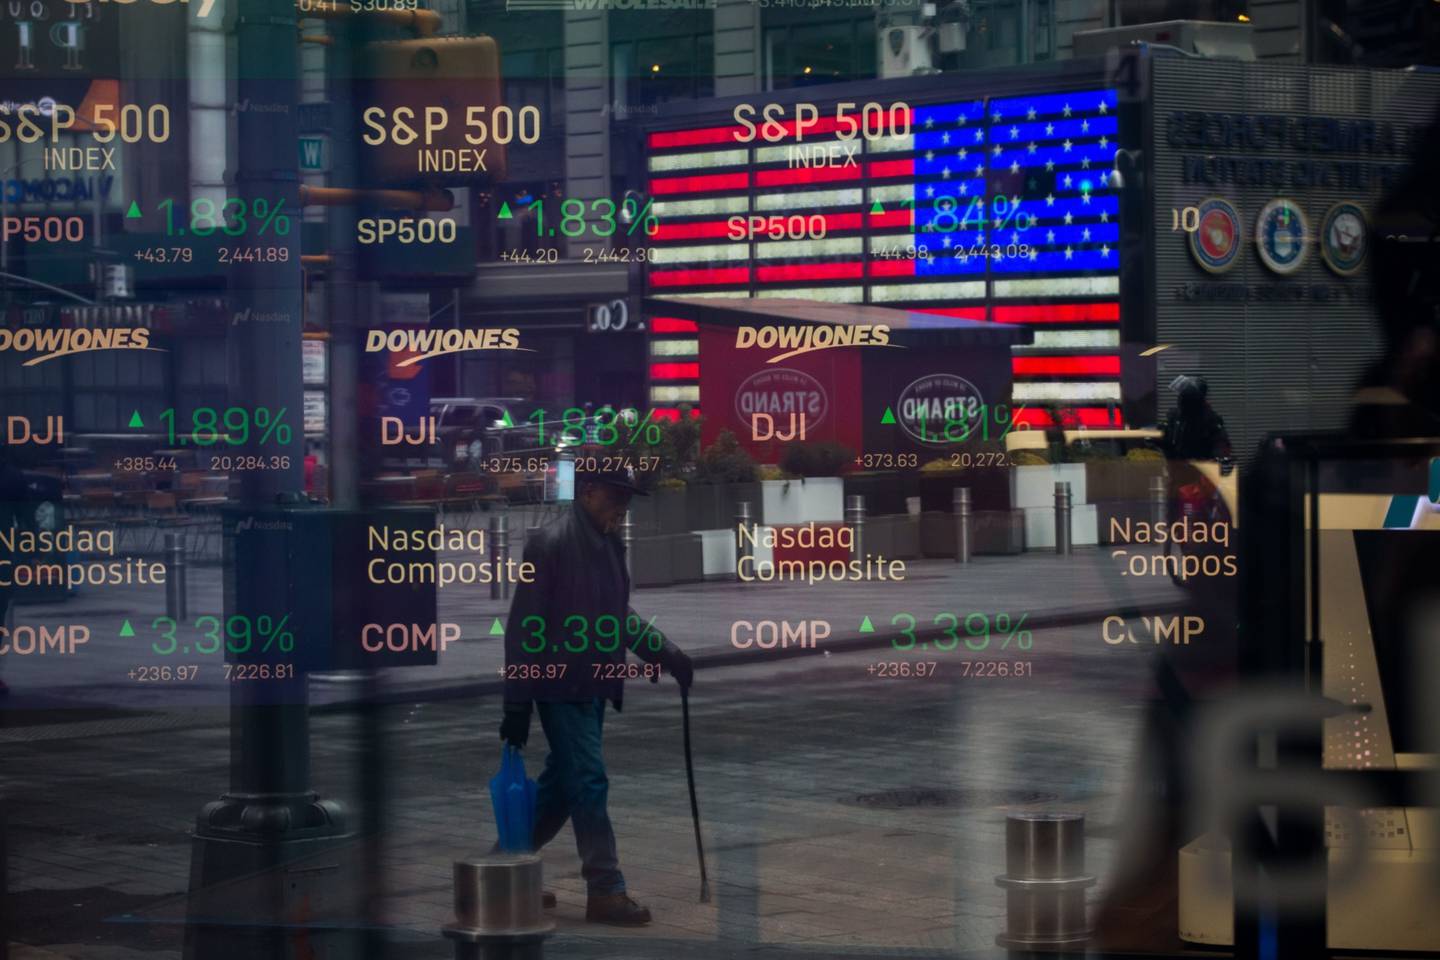 Monitors displaying stock market information are seen through the window of the Nasdaq MarketSite in the Times Square neighborhood of New York, U.S.